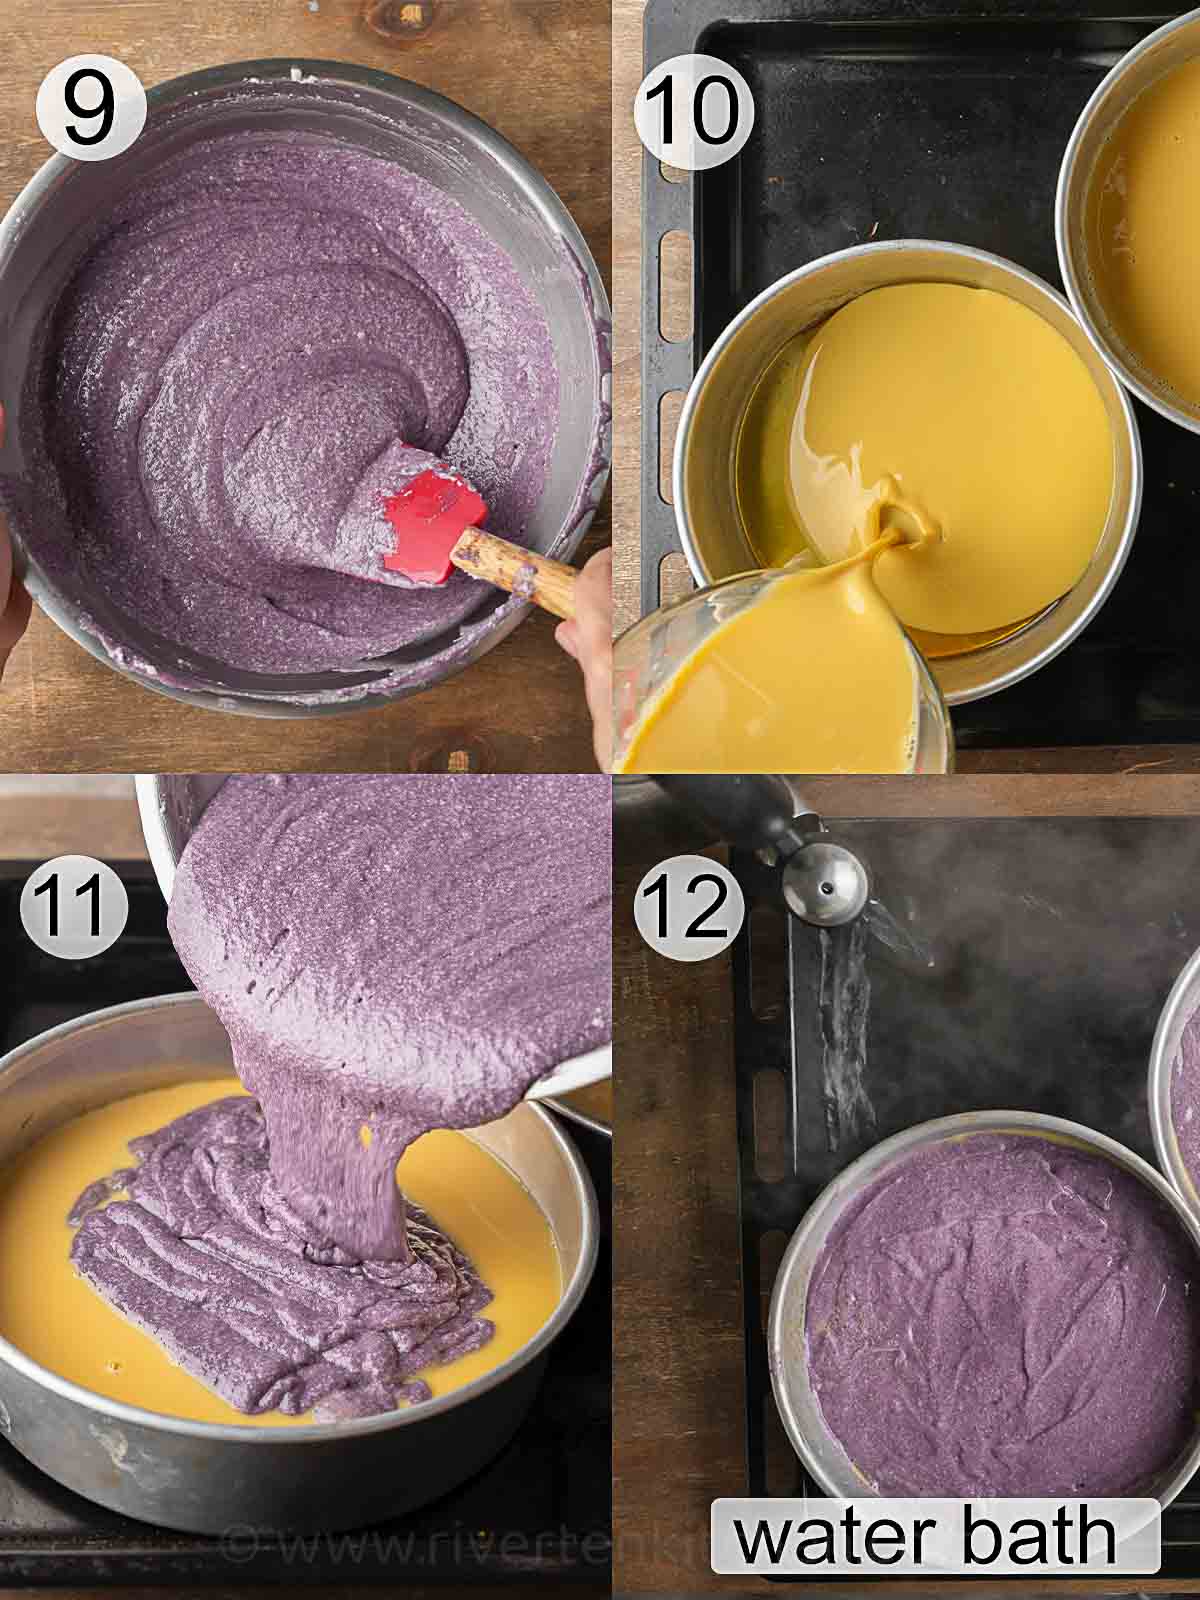 step-by-step process on how to make ube flan cake and prepare water bath.